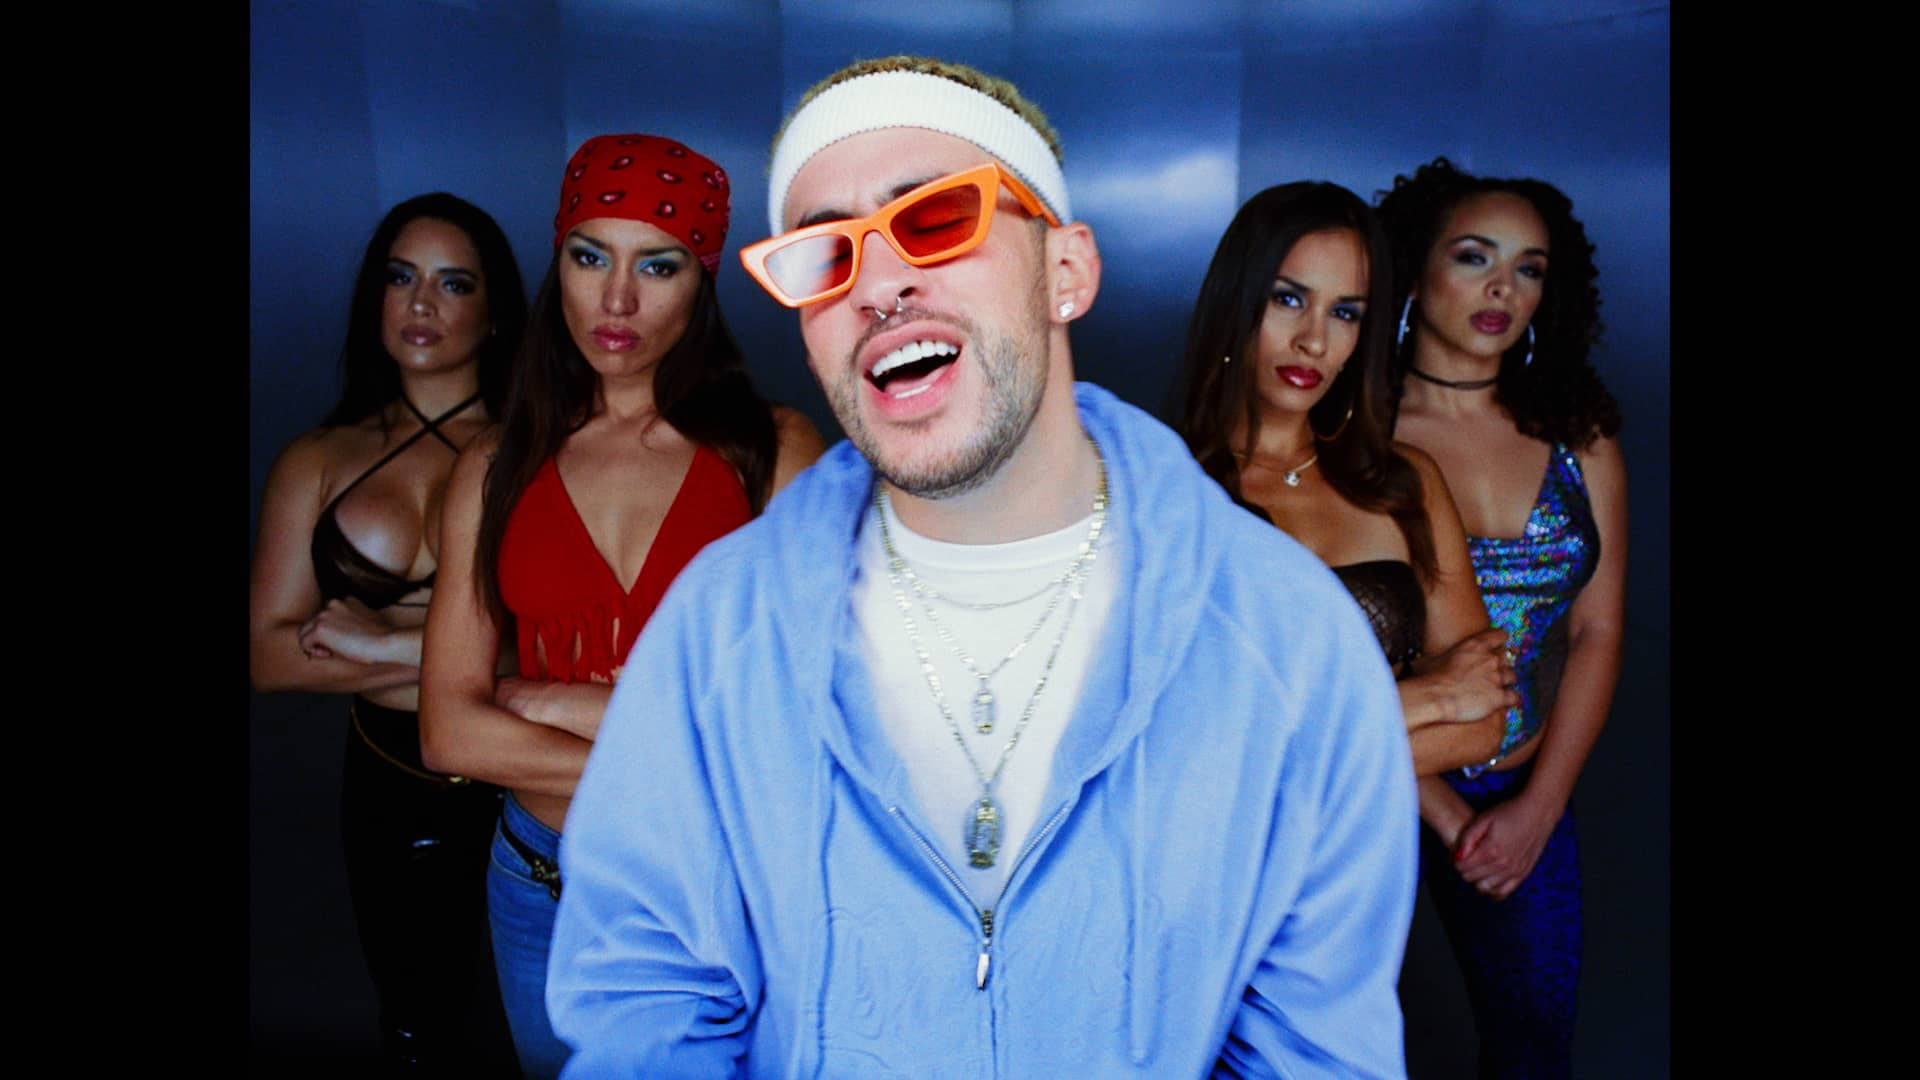 Bad Bunny With Four Girls Background